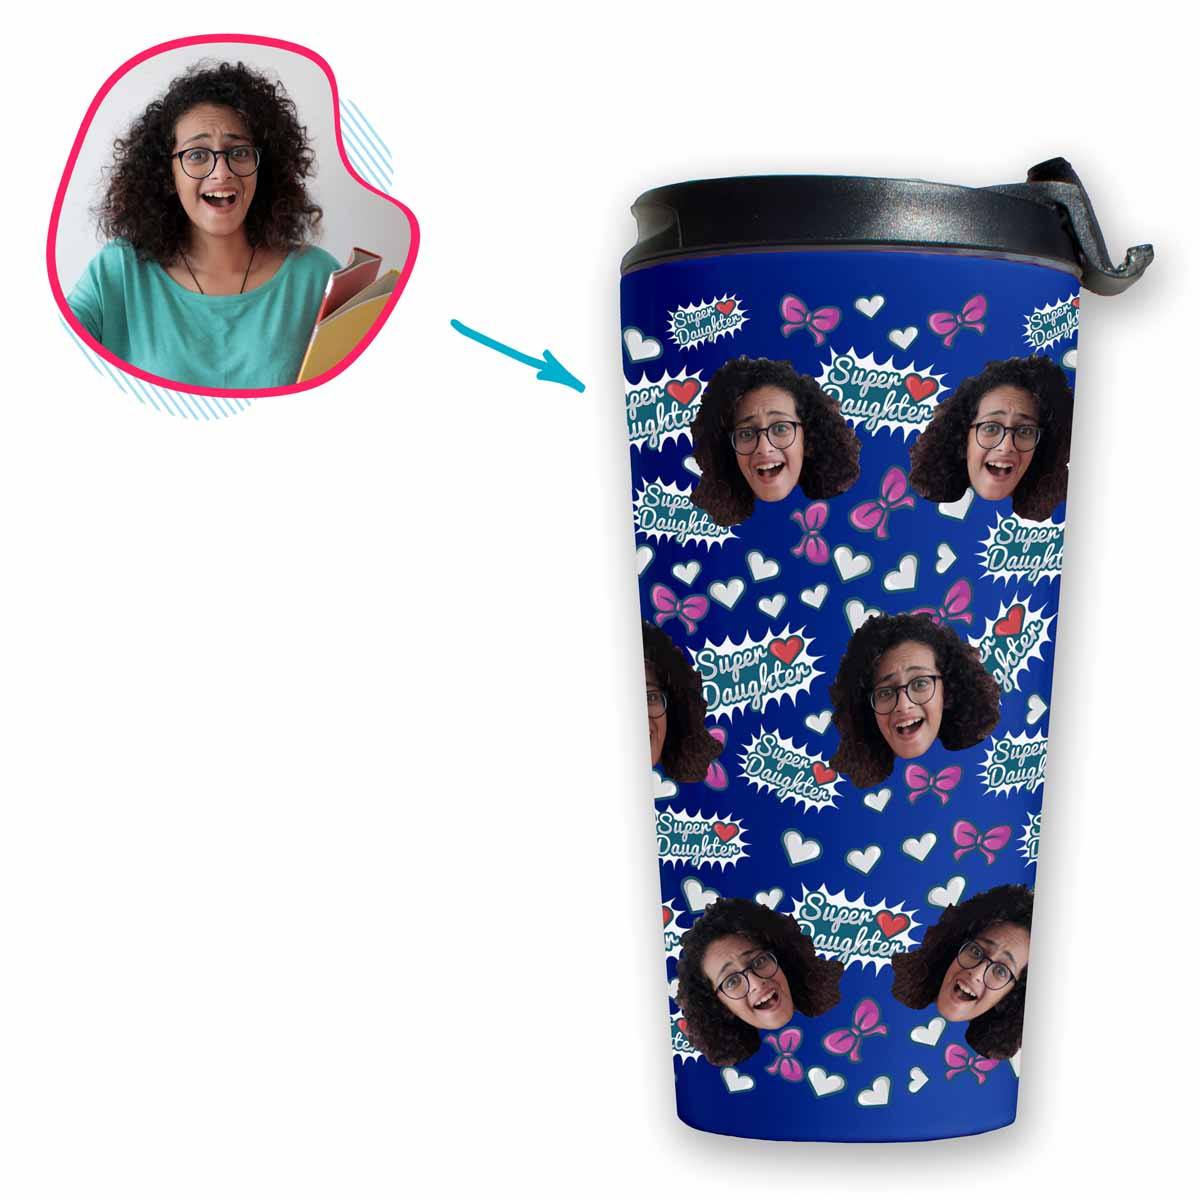 darkblue Super Daughter travel mug personalized with photo of face printed on it